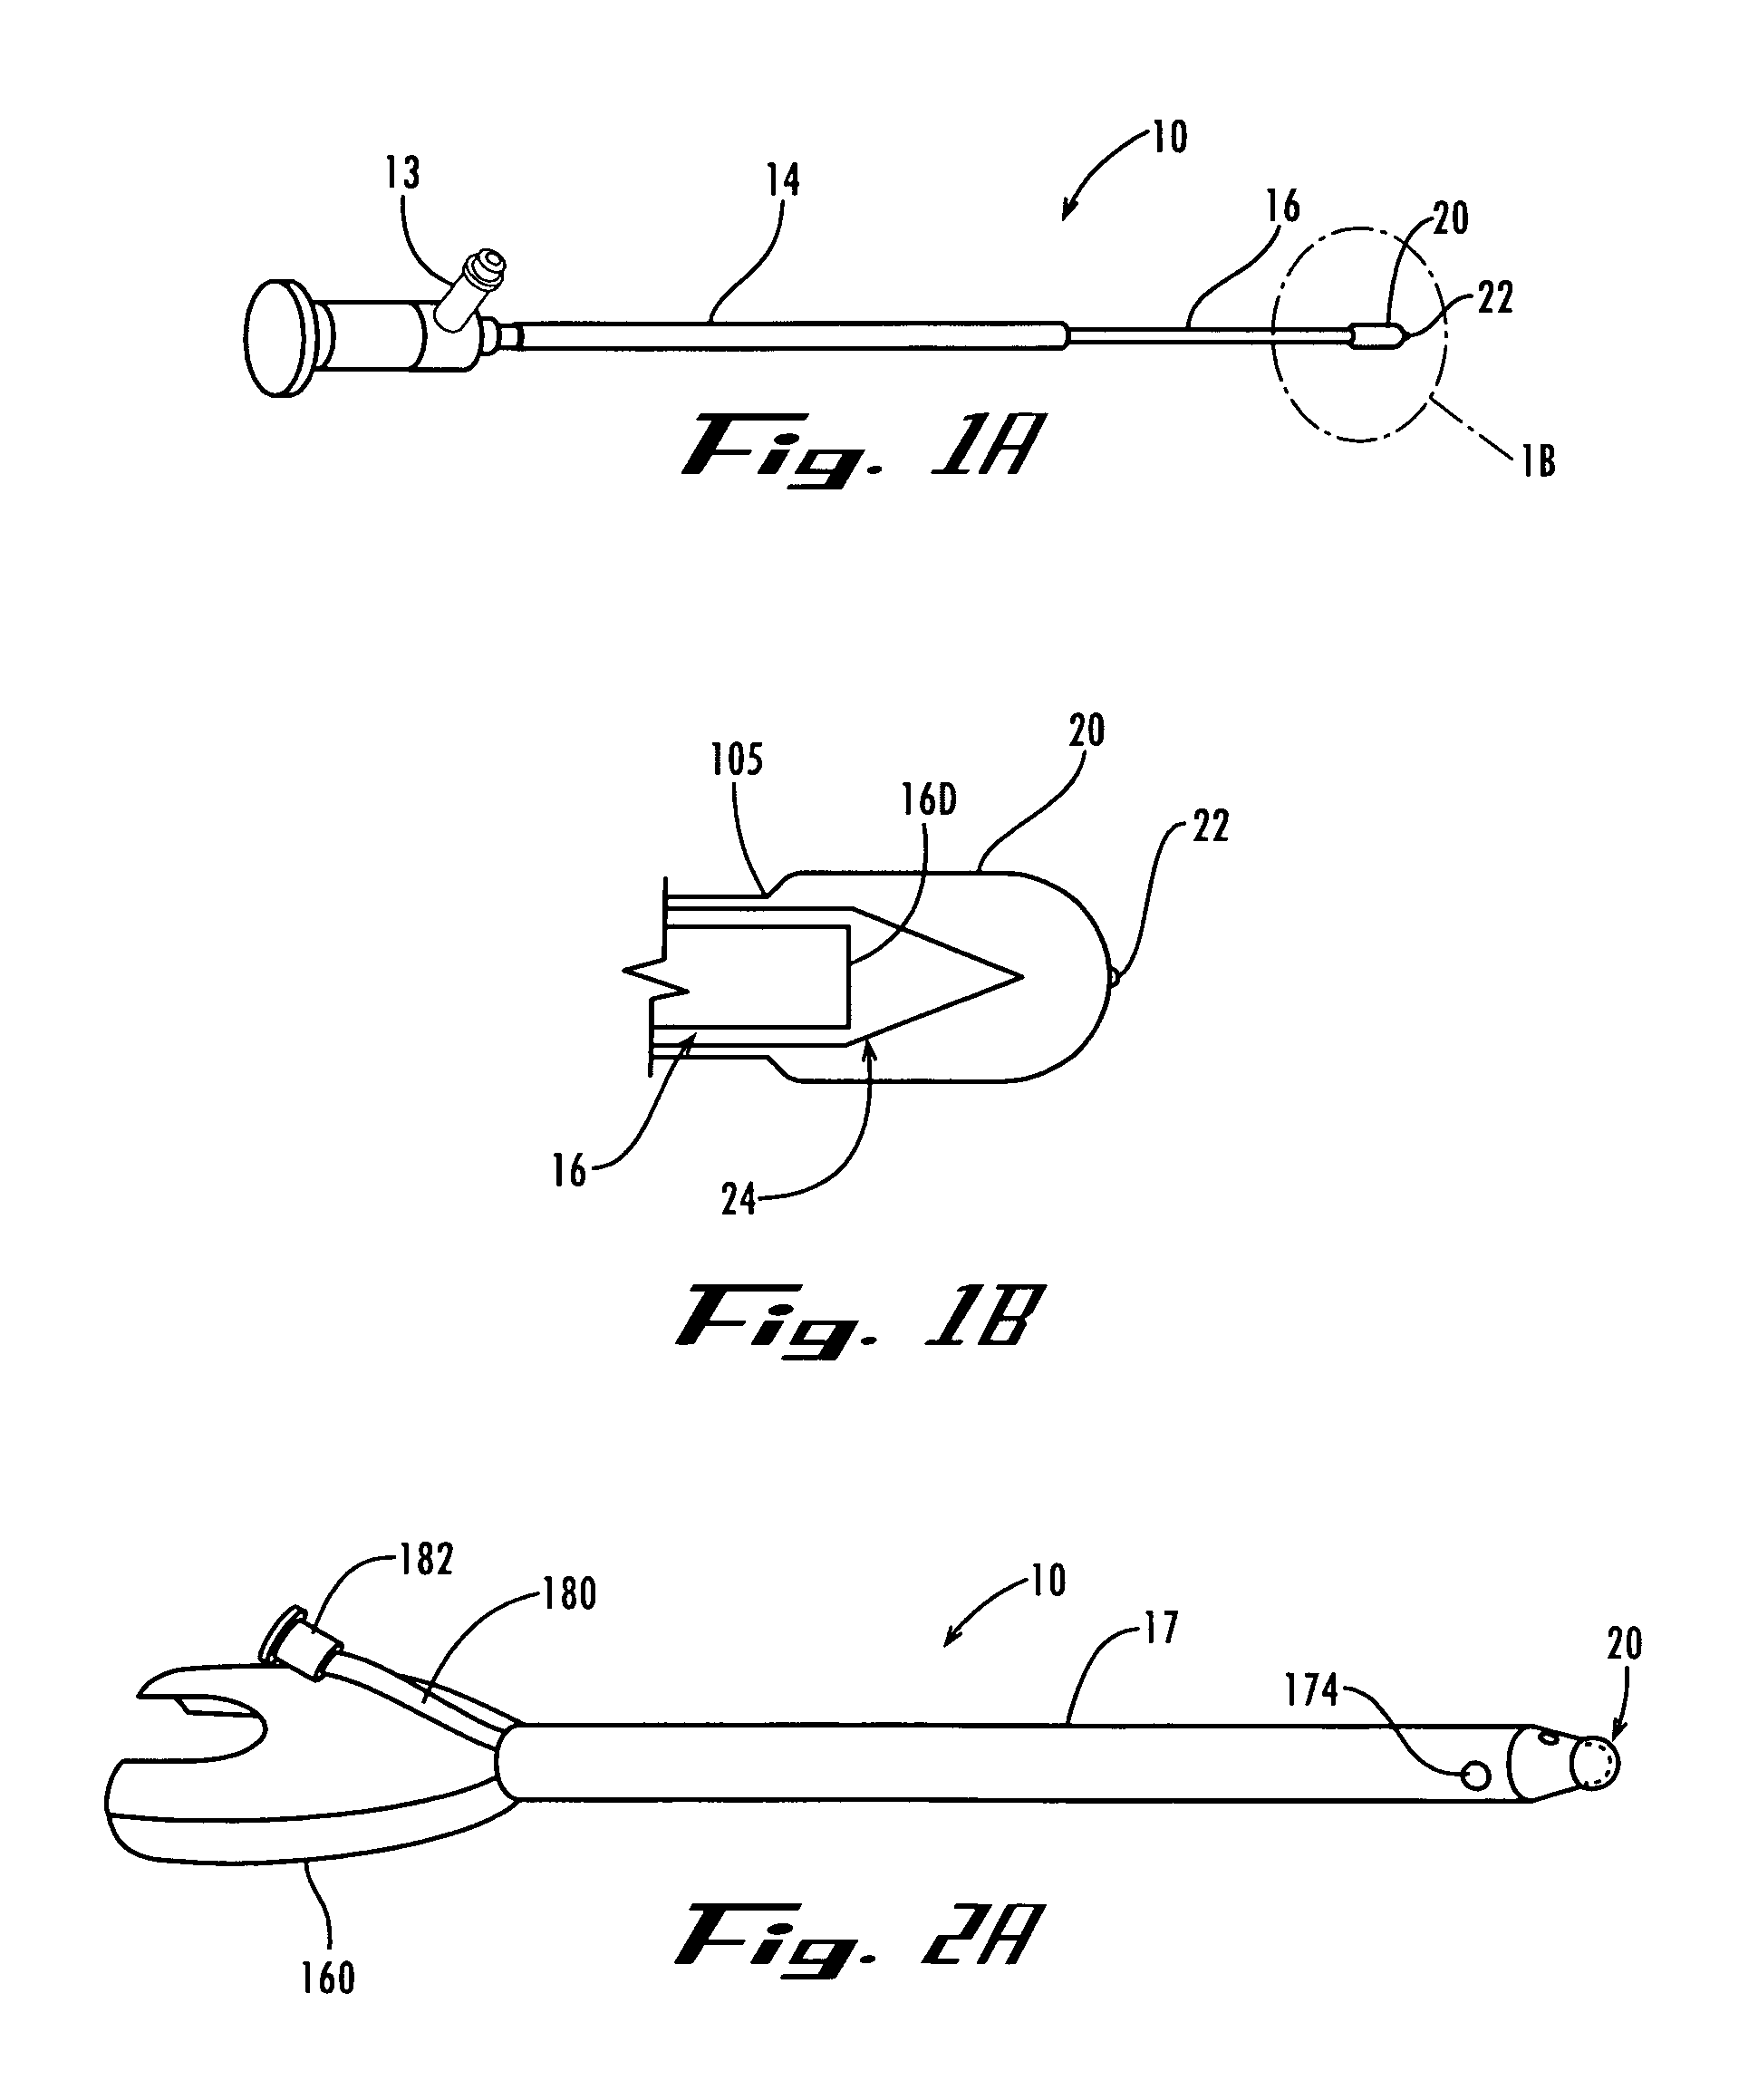 Apparatus and methods for performing minimally-invasive surgical procedures